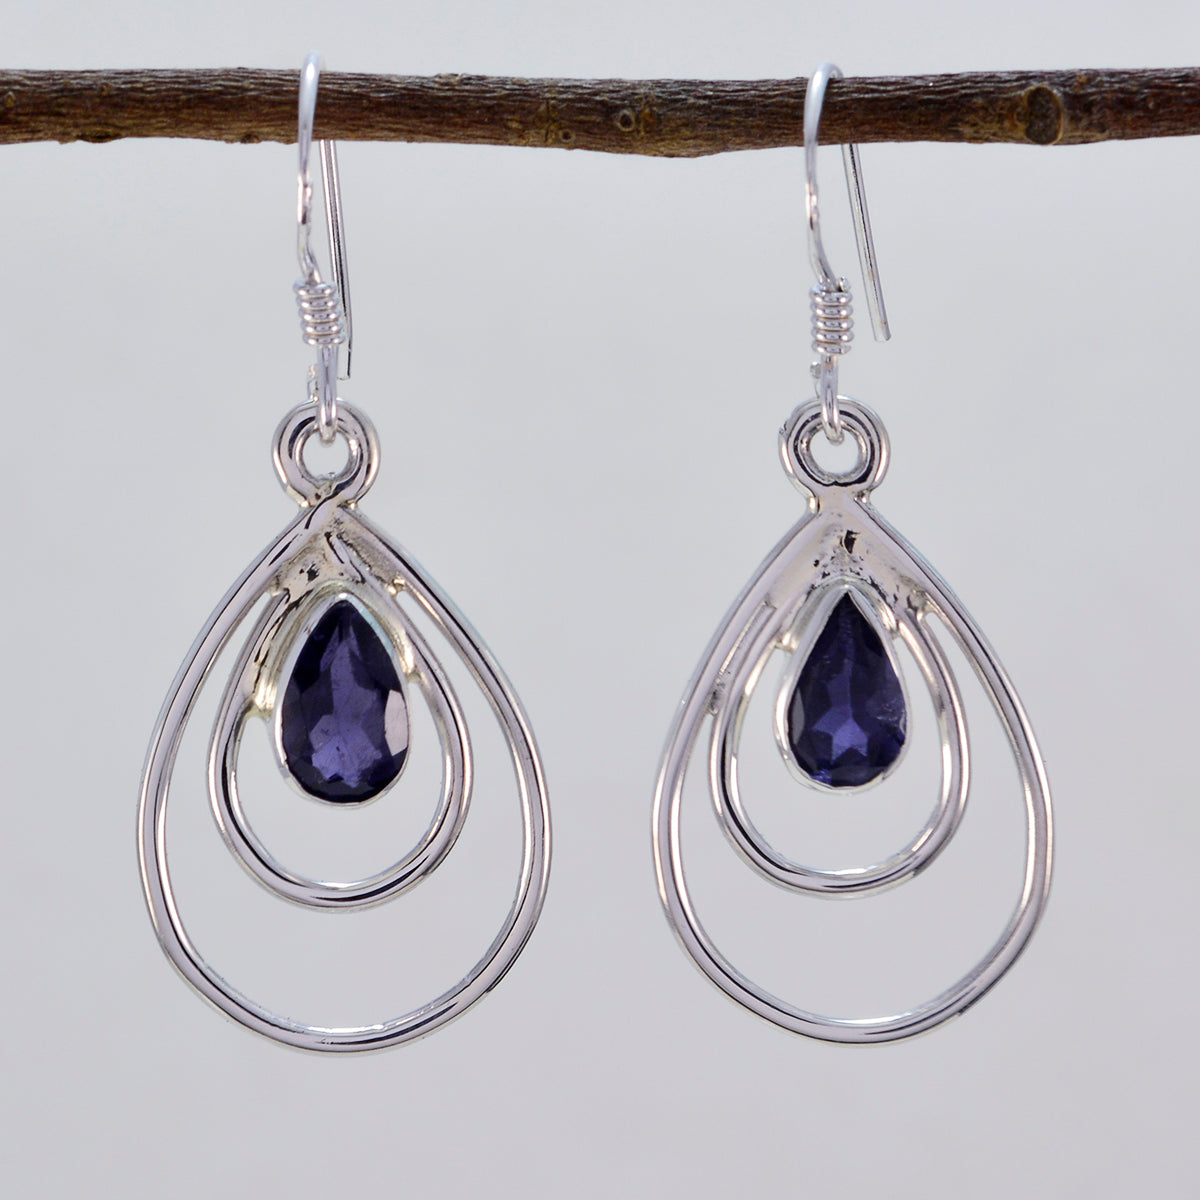 Riyo Natural Gemstone pear Faceted Nevy Blue Iolite Silver Earring gift for friend